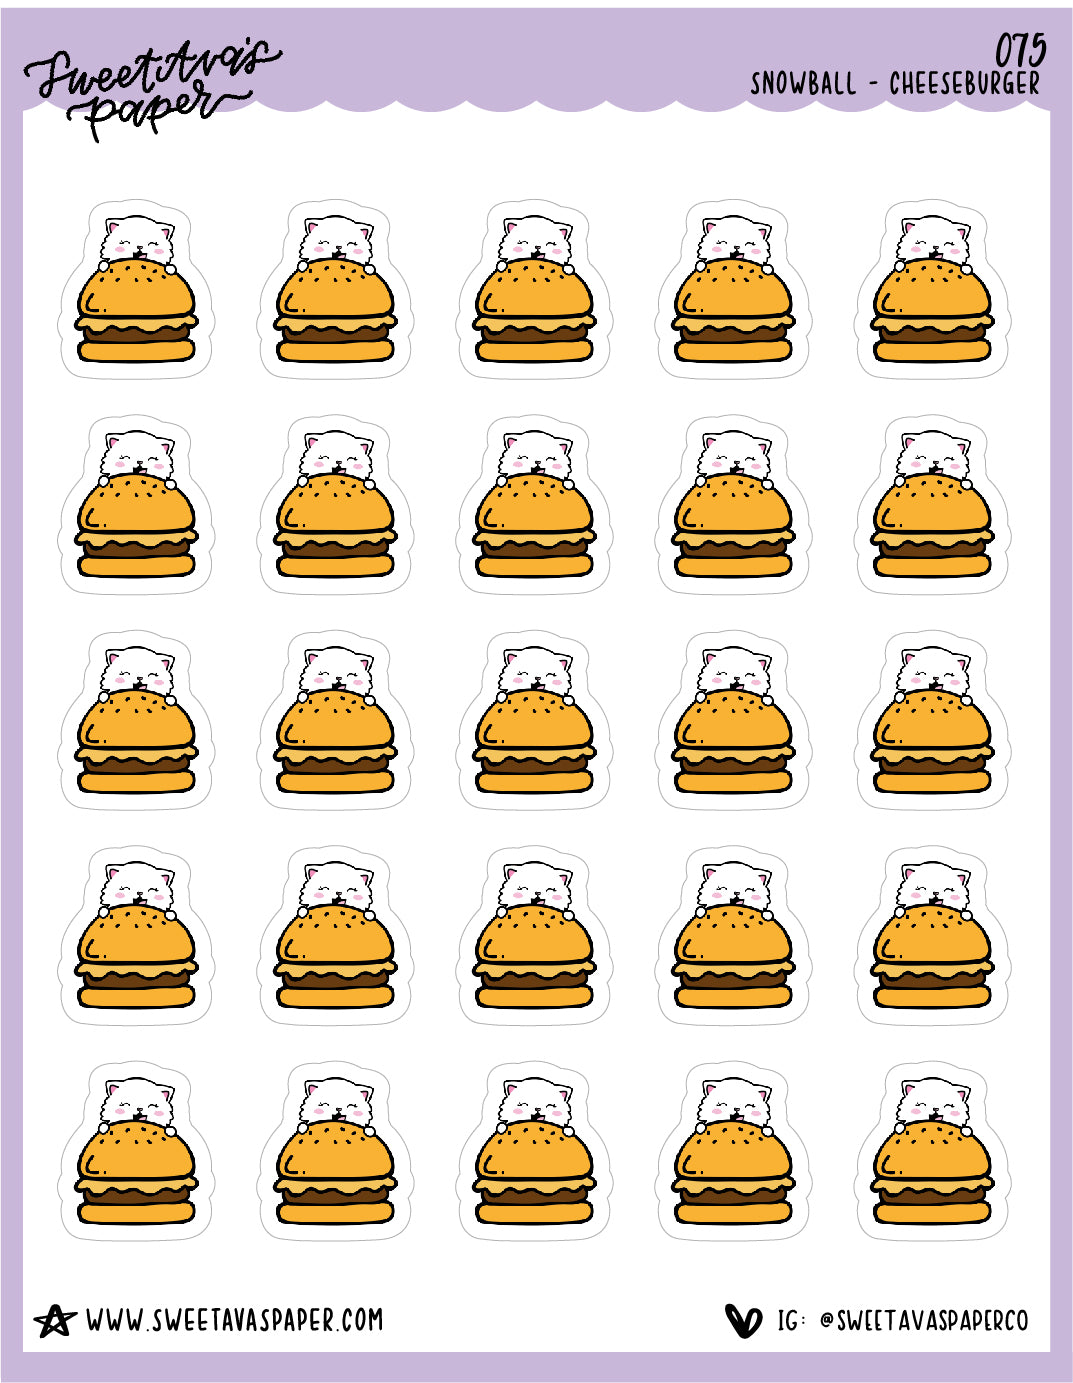 Cheeseburger Stickers - Snowball The Cat - [075]